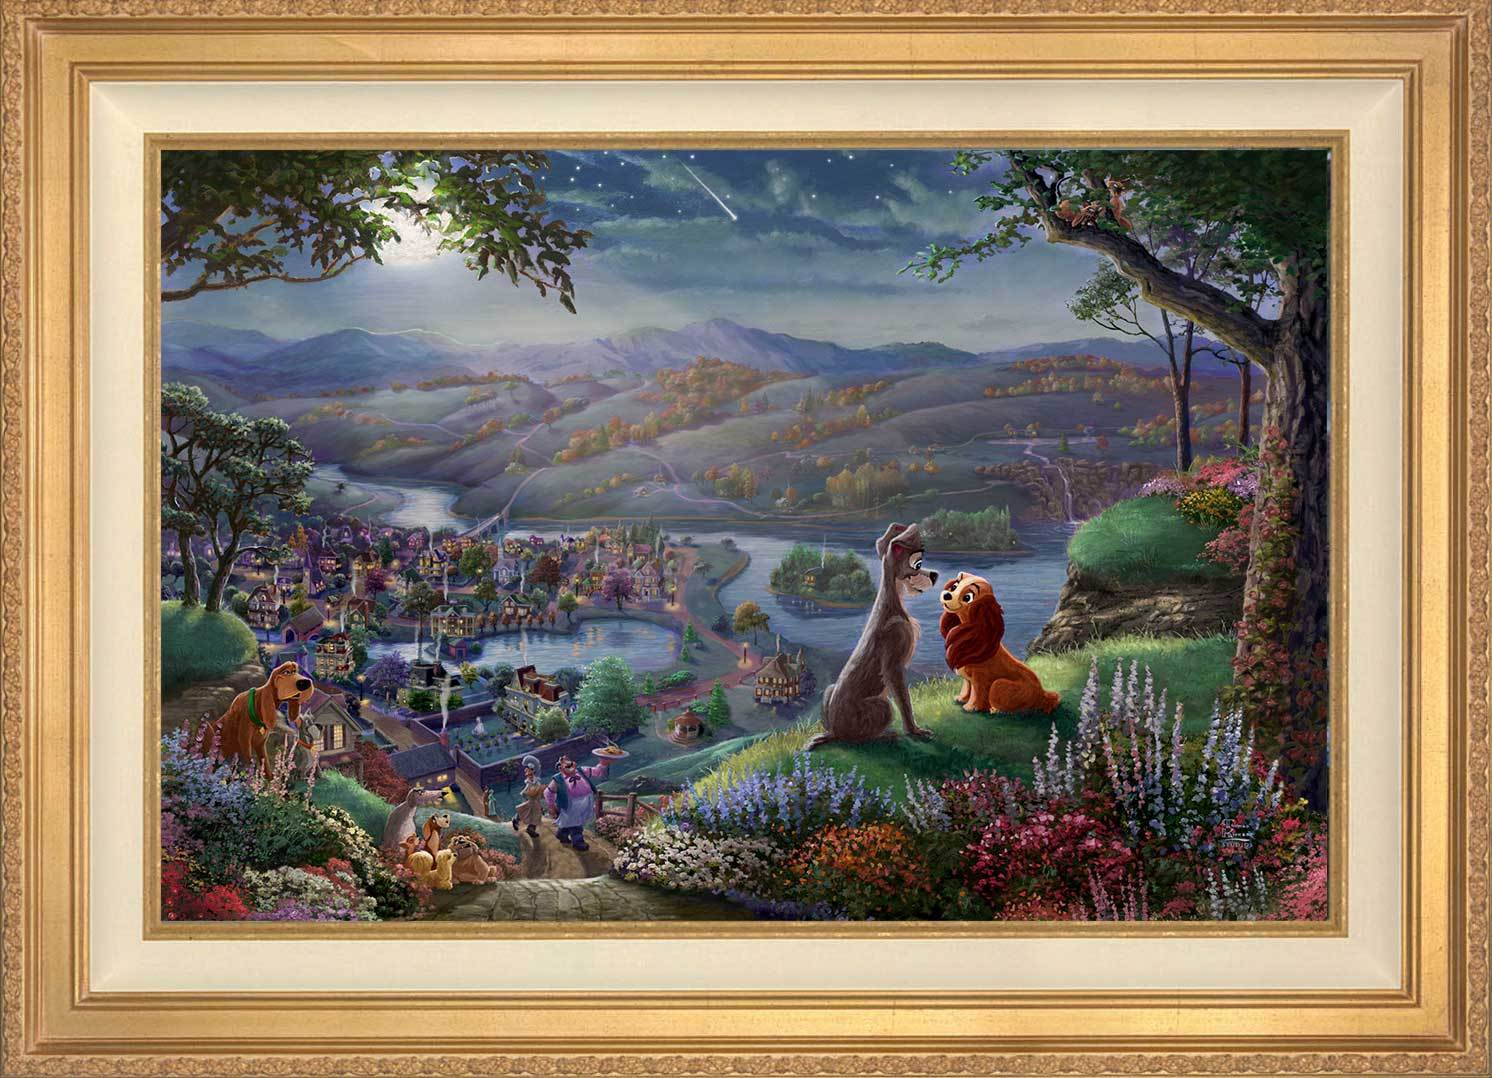  Lady and the Tramp sit gazing into each other’s eyes and falling-in-love, they are seemingly unaware of the world around them - in Antique Gold Frame